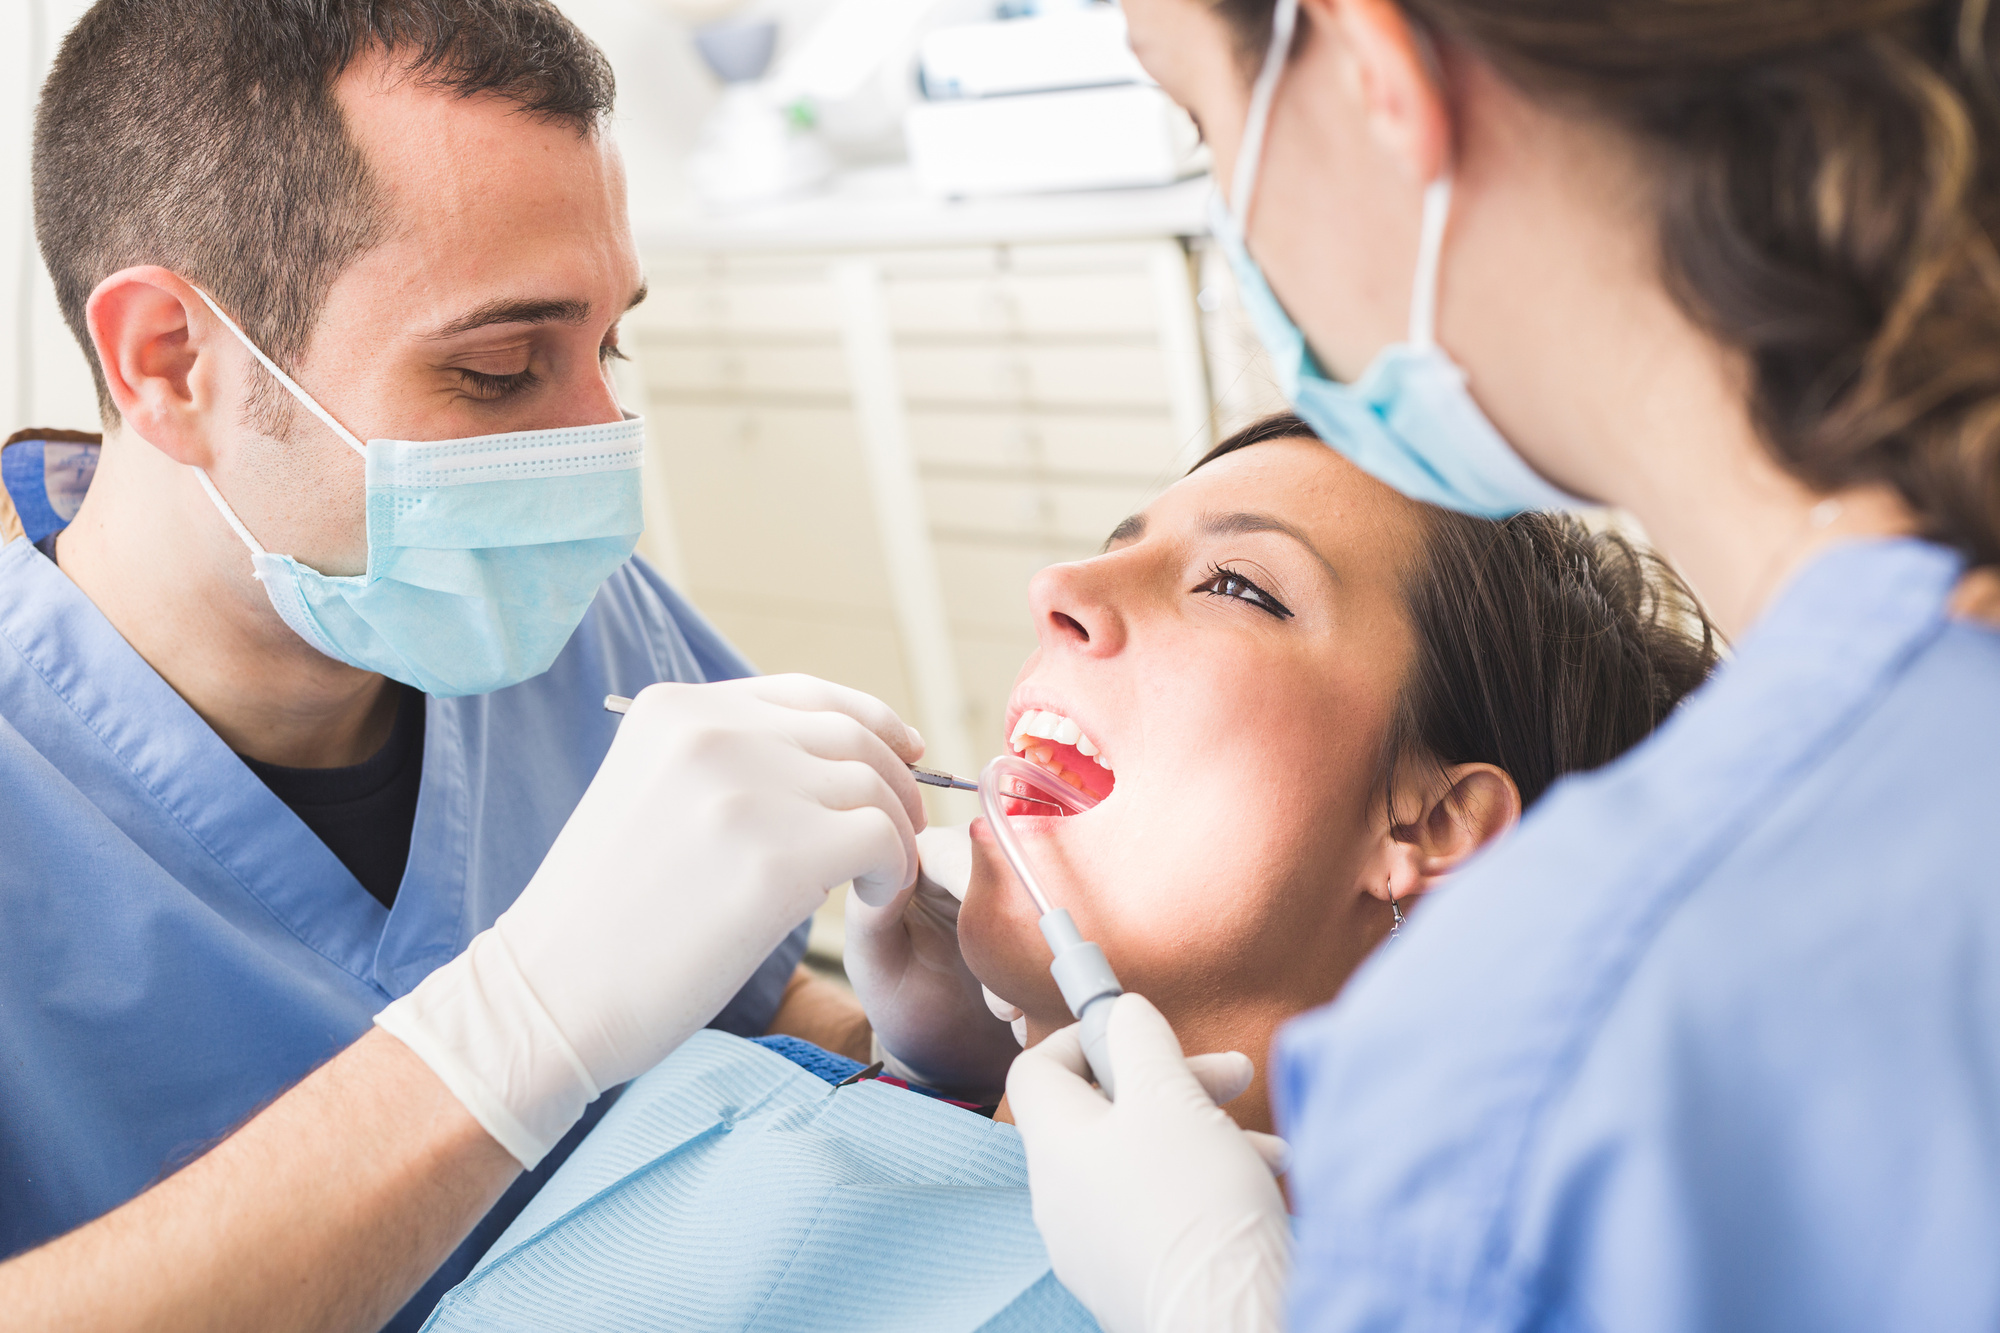 3. When to Seek Emergency Dental Care–Know the Signs